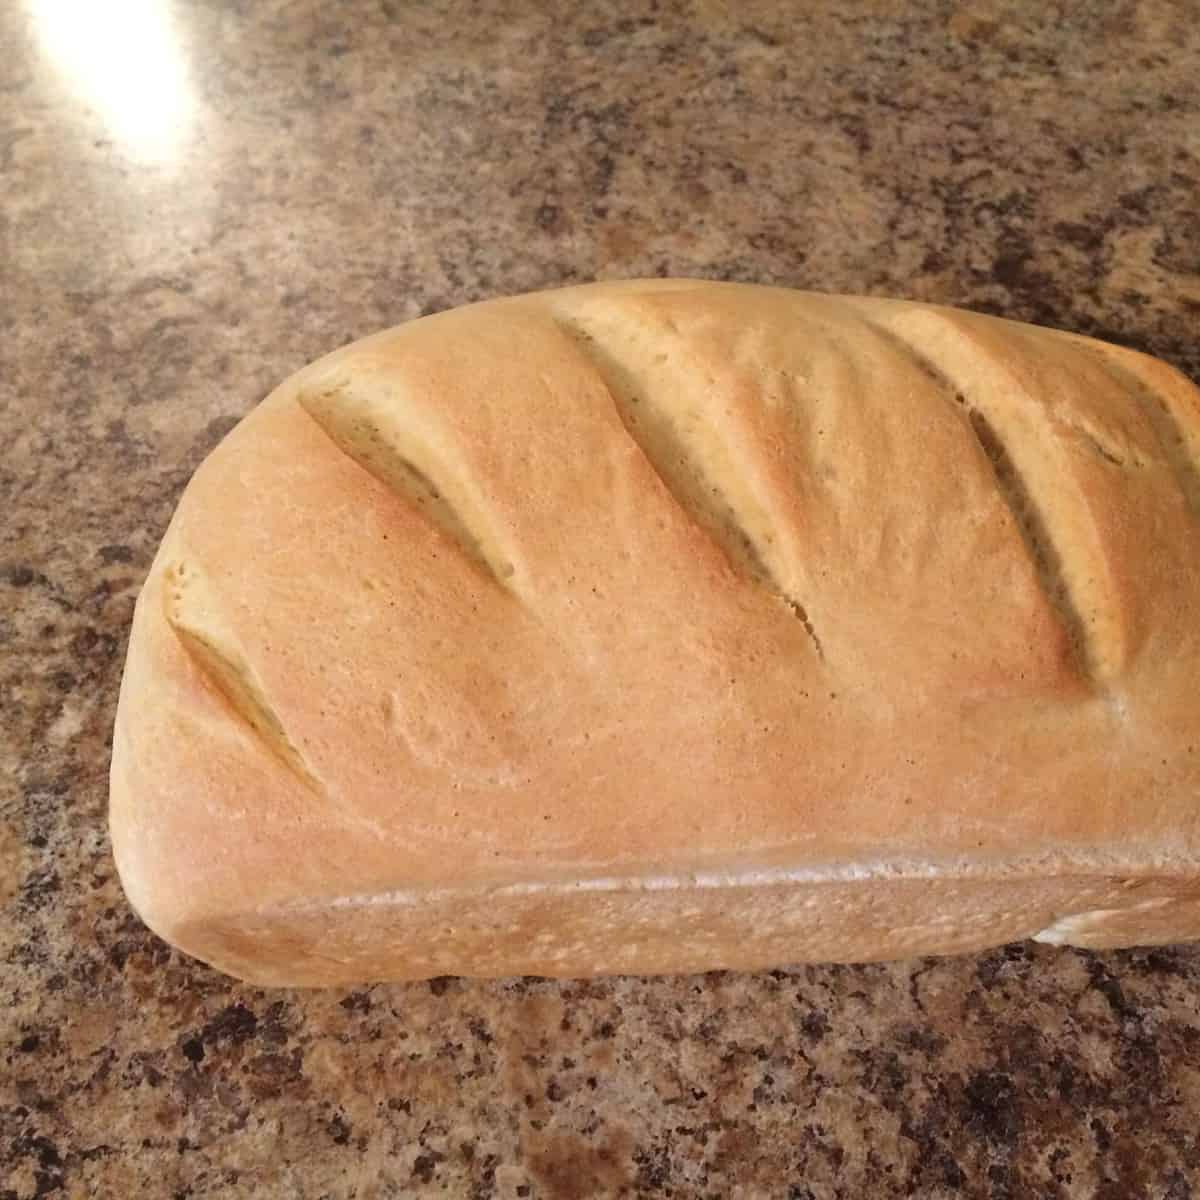  Warm, fresh bread straight out of the oven